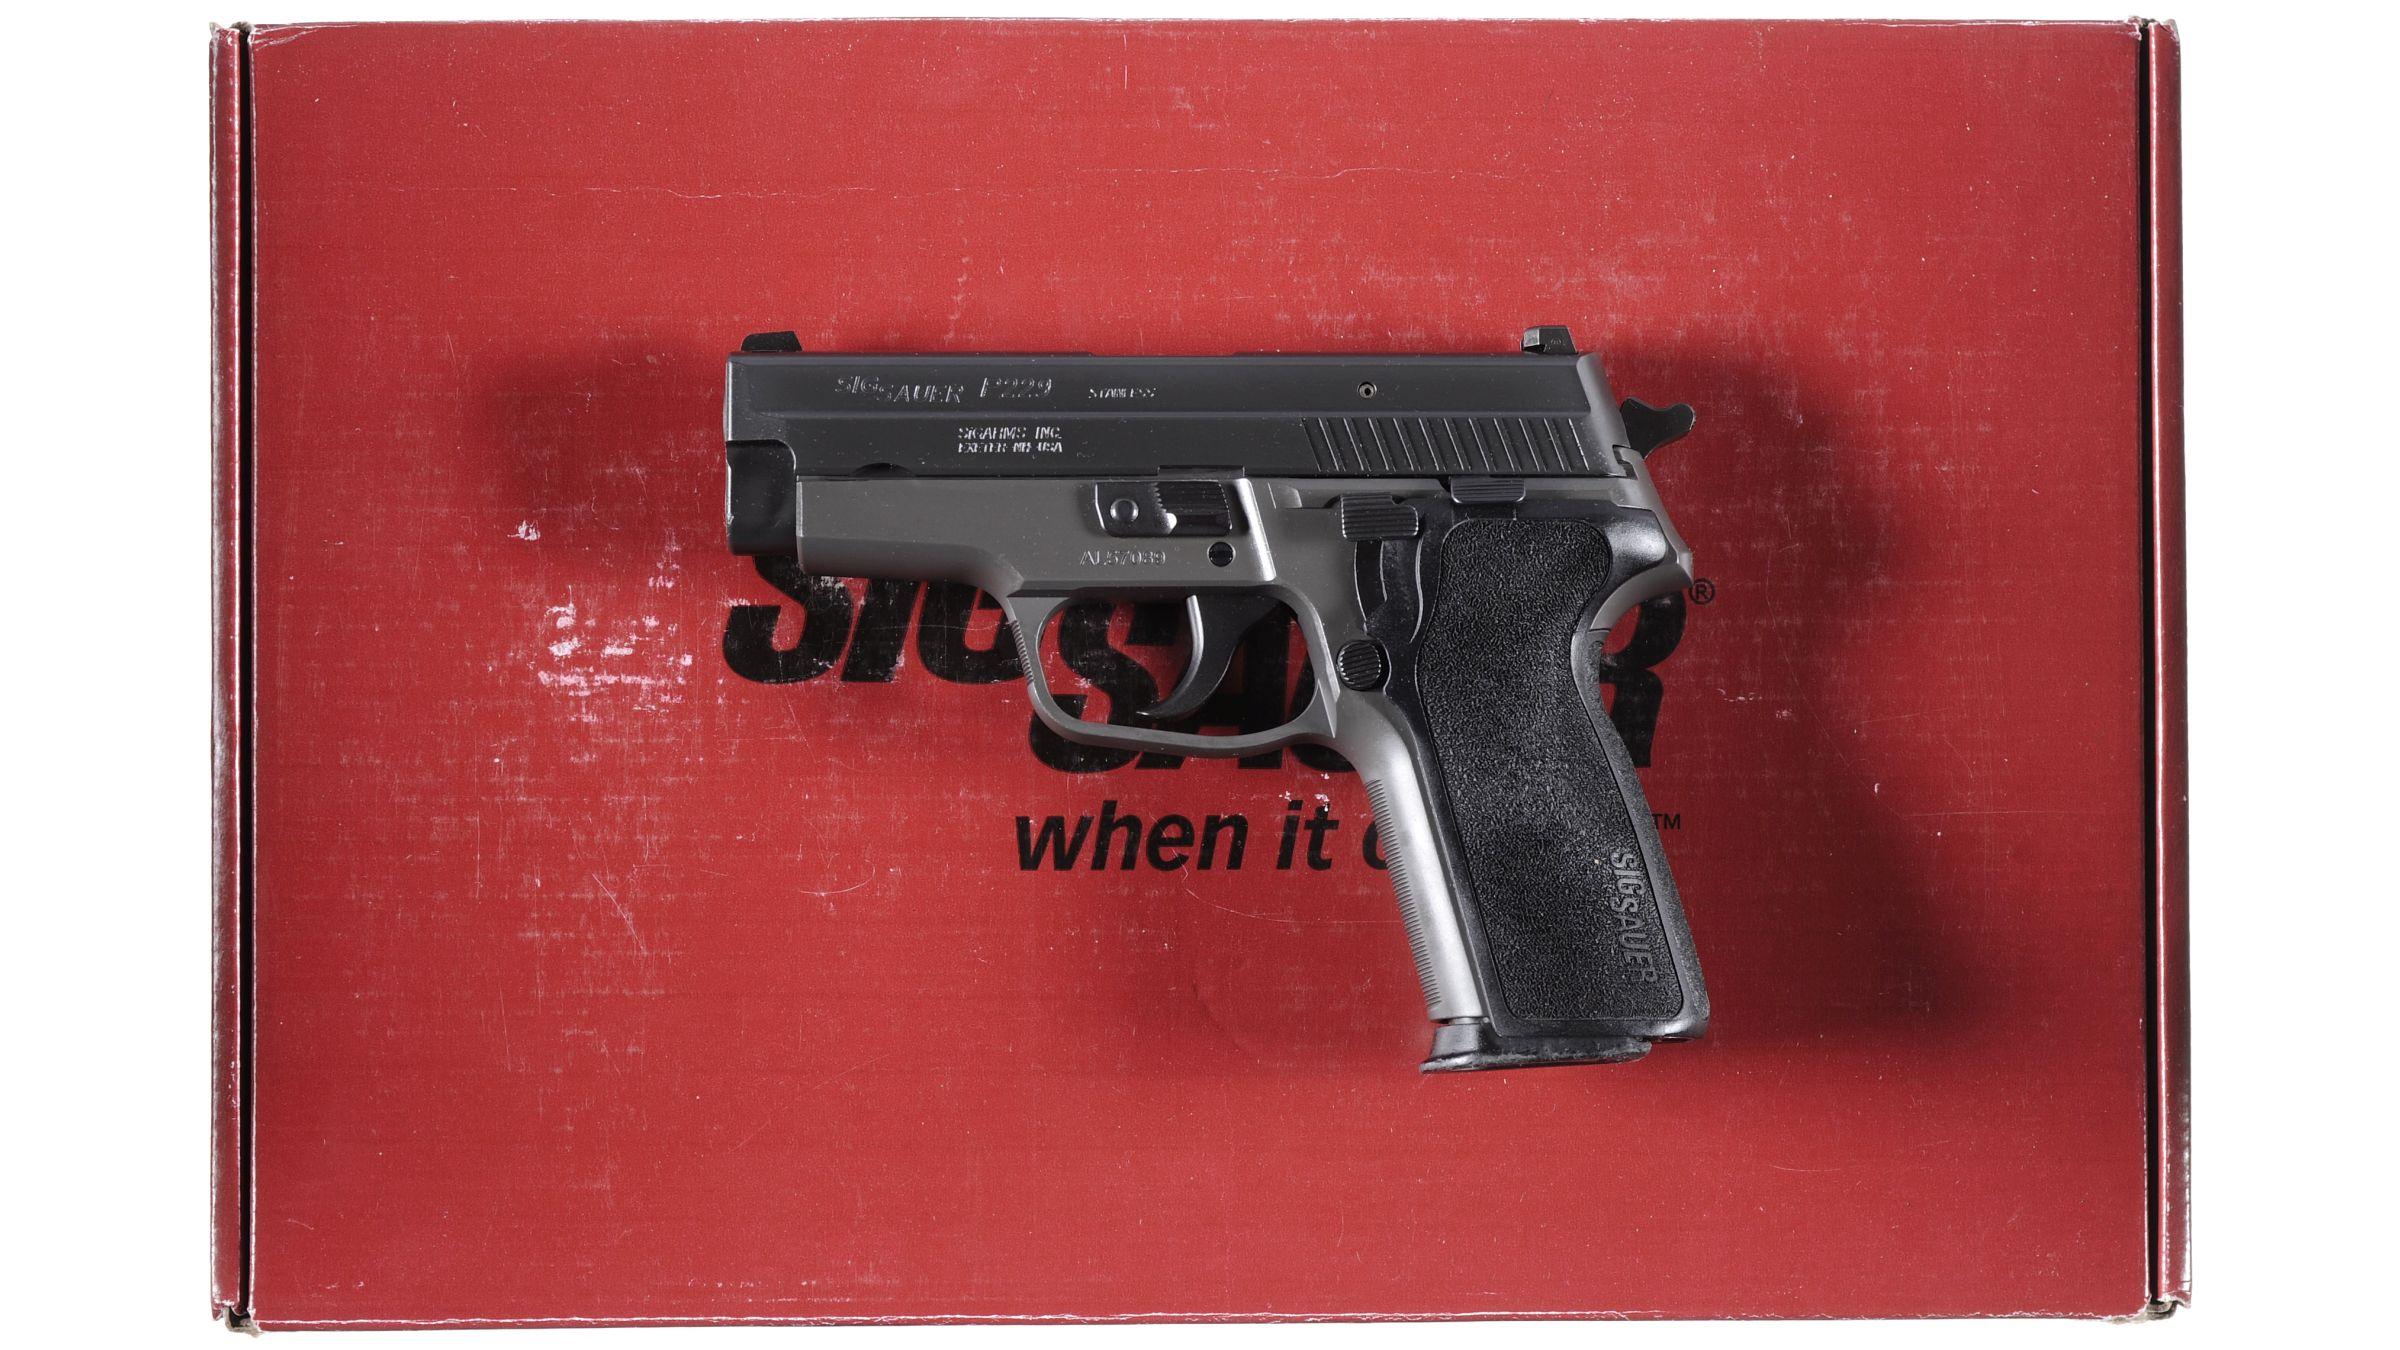 sig p229 serial numbers by manufacture date